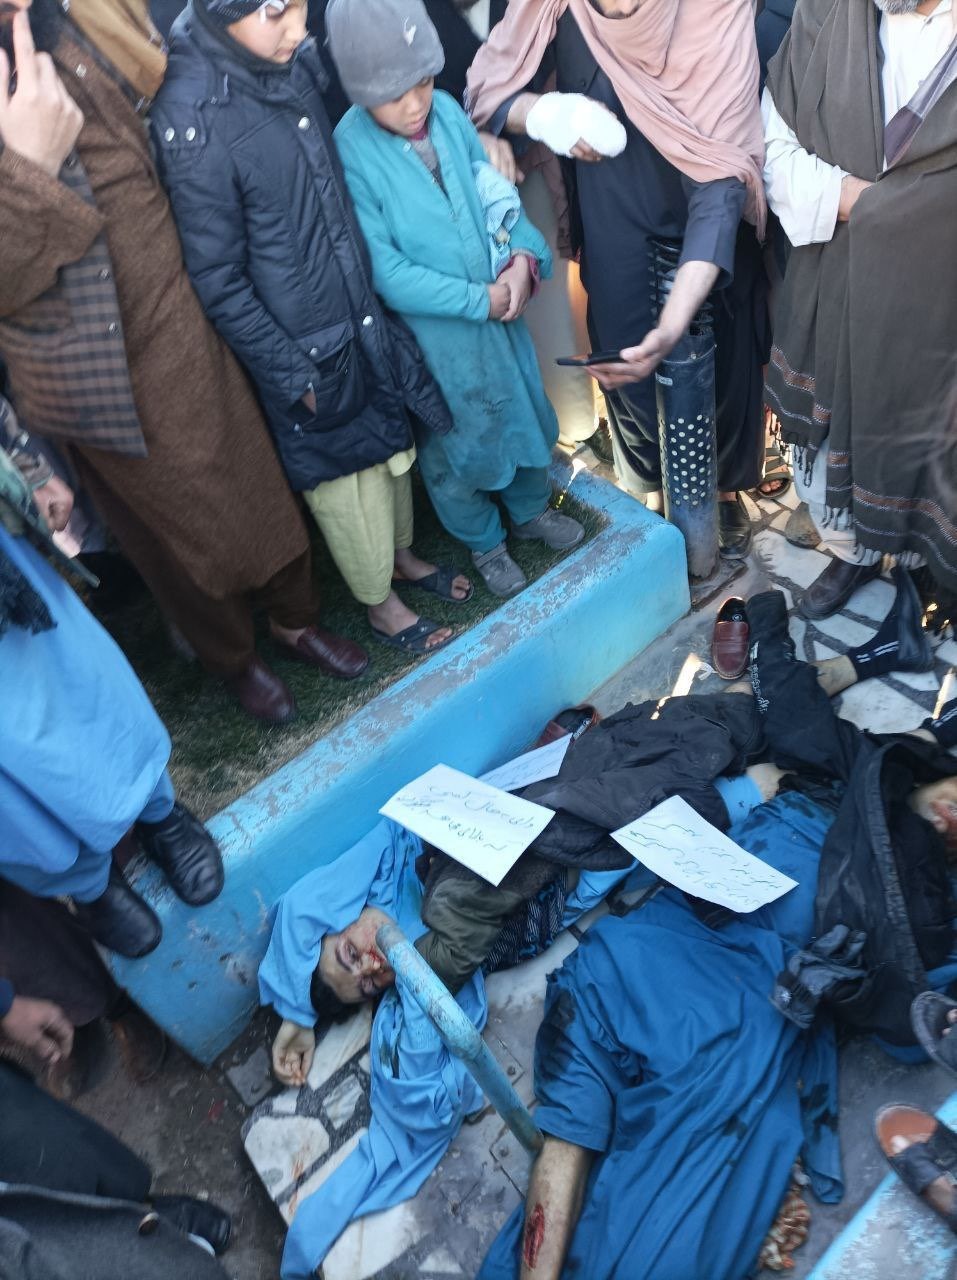 Showing the dead bodies accused of theft in Herat by the Taliban